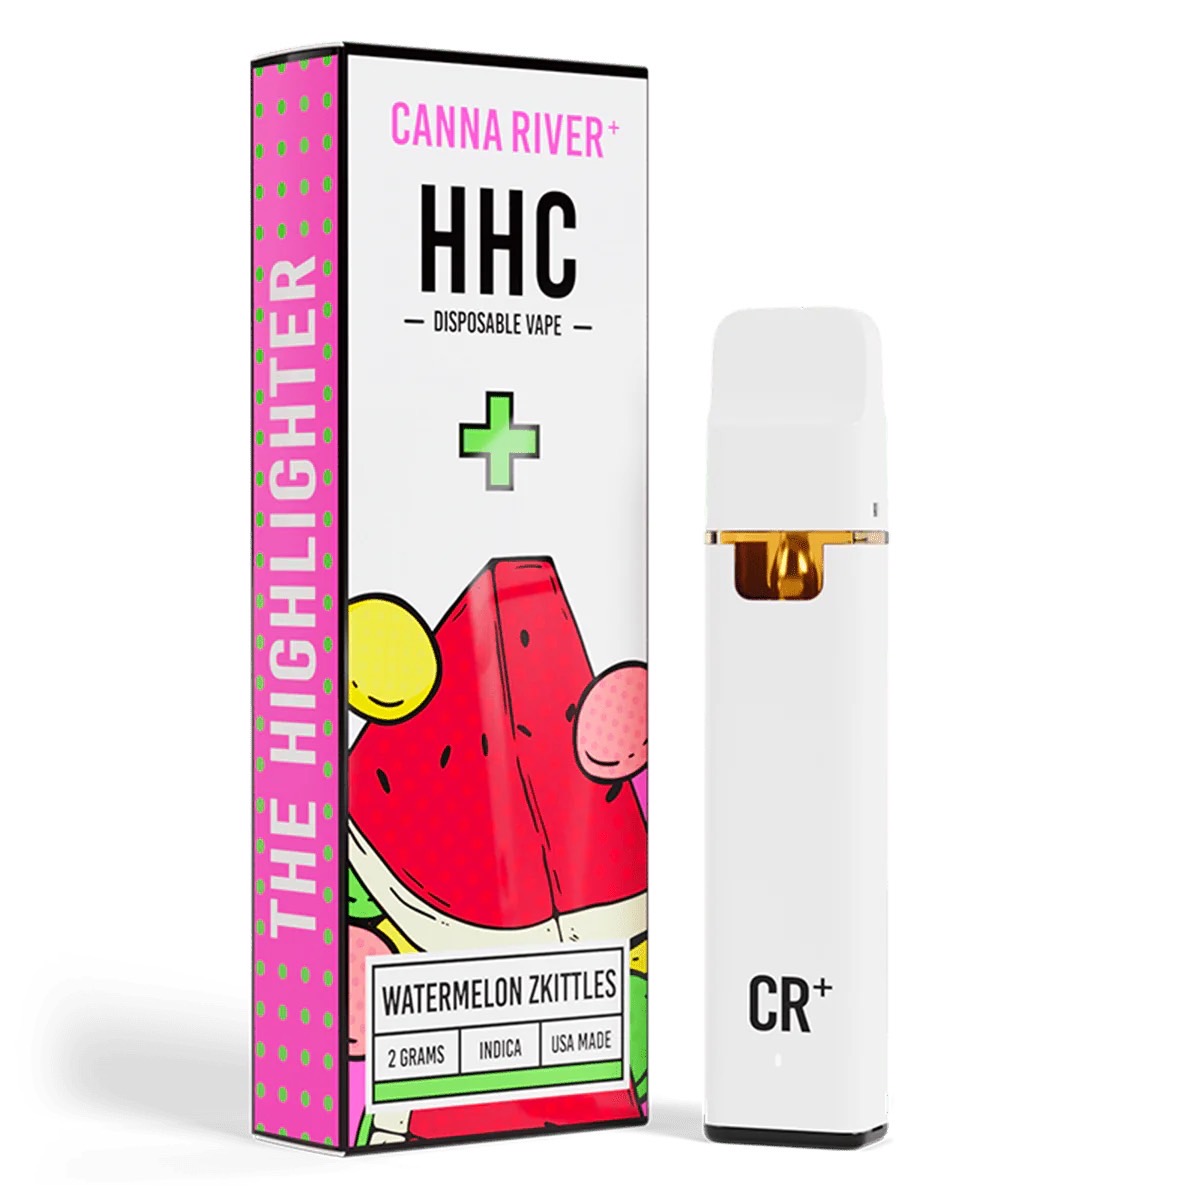 Canna River – HHC – Watermelon Zkittles (Indica) – 2G – Disposable